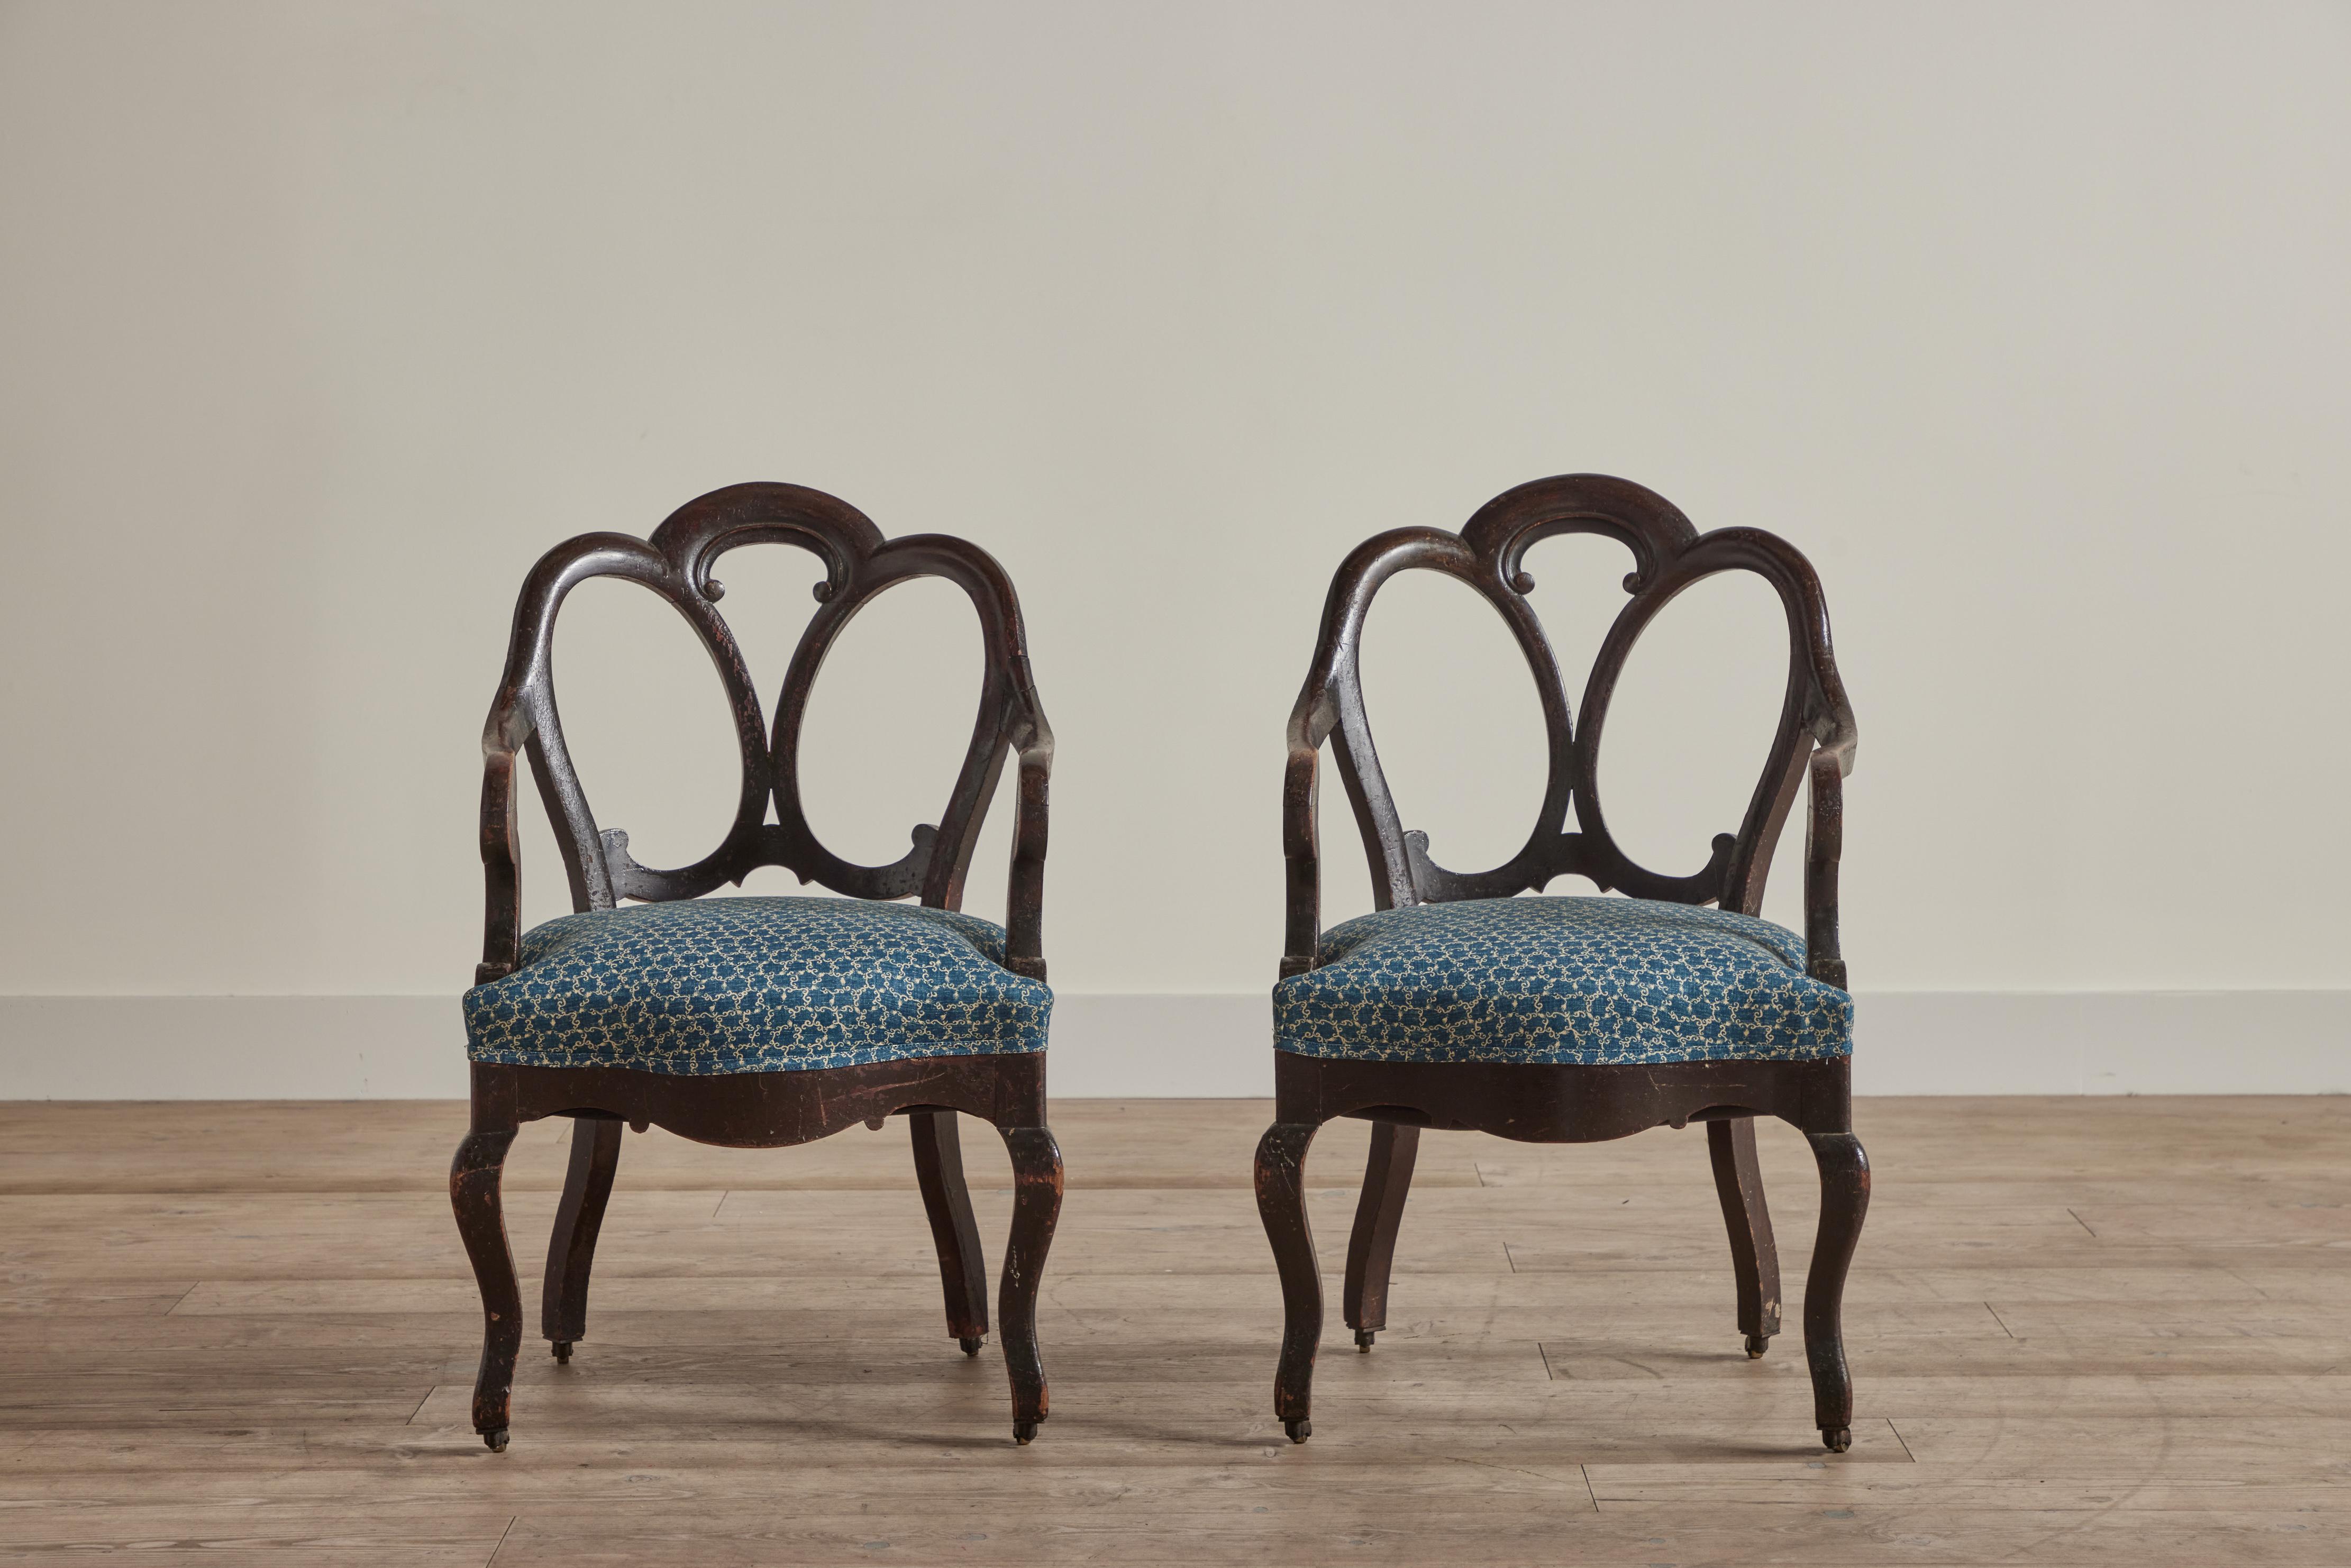 Pair of late 19th century wood side chairs from England with new upholstery in Robert Kime’s “Te Blue” fabric. Chairs have metal wheels on the feet. Visible wear on wood frame that is consistent with age and use. 